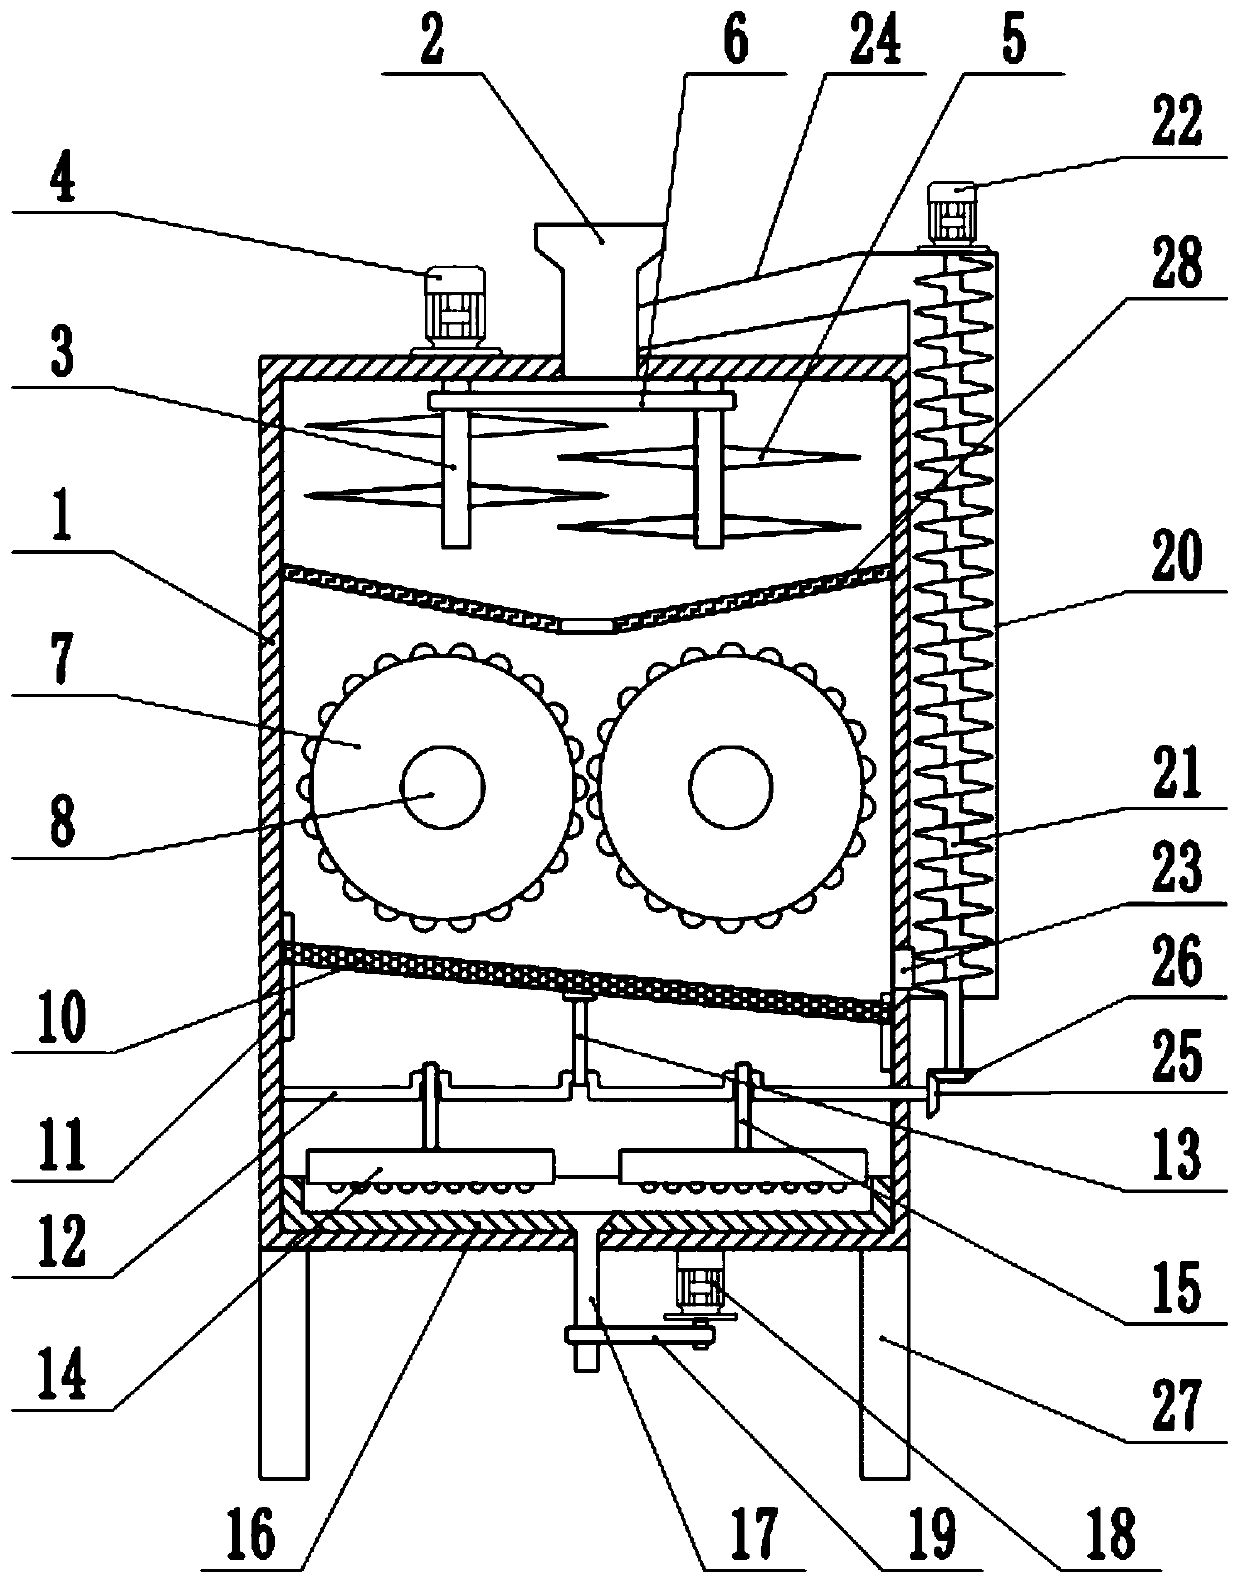 Self-circulation smashing and grinding device for rice processing